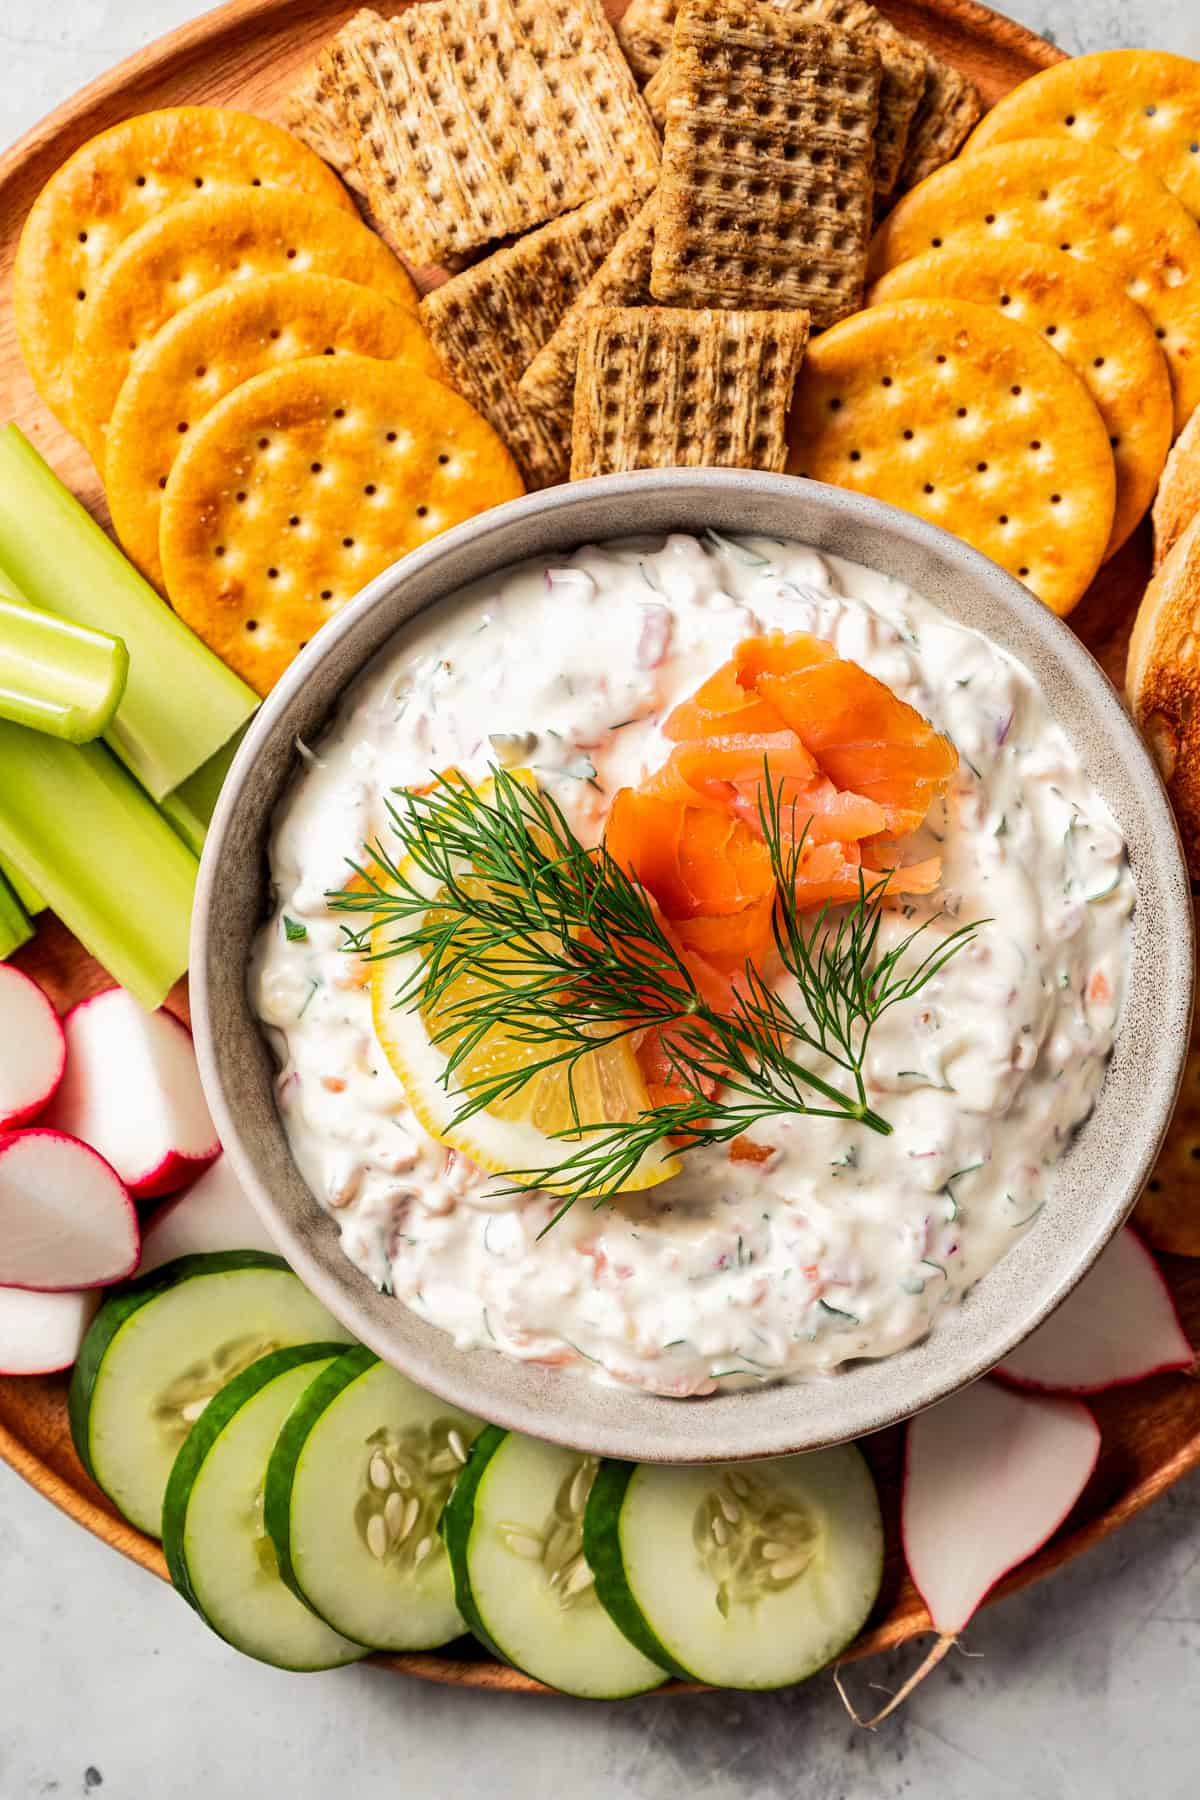 Overhead view of a bowl of smoked salmon dip garnished with lox, lemon, and a fresh dill sprig, surrounded by crackers and crudités on a platter.